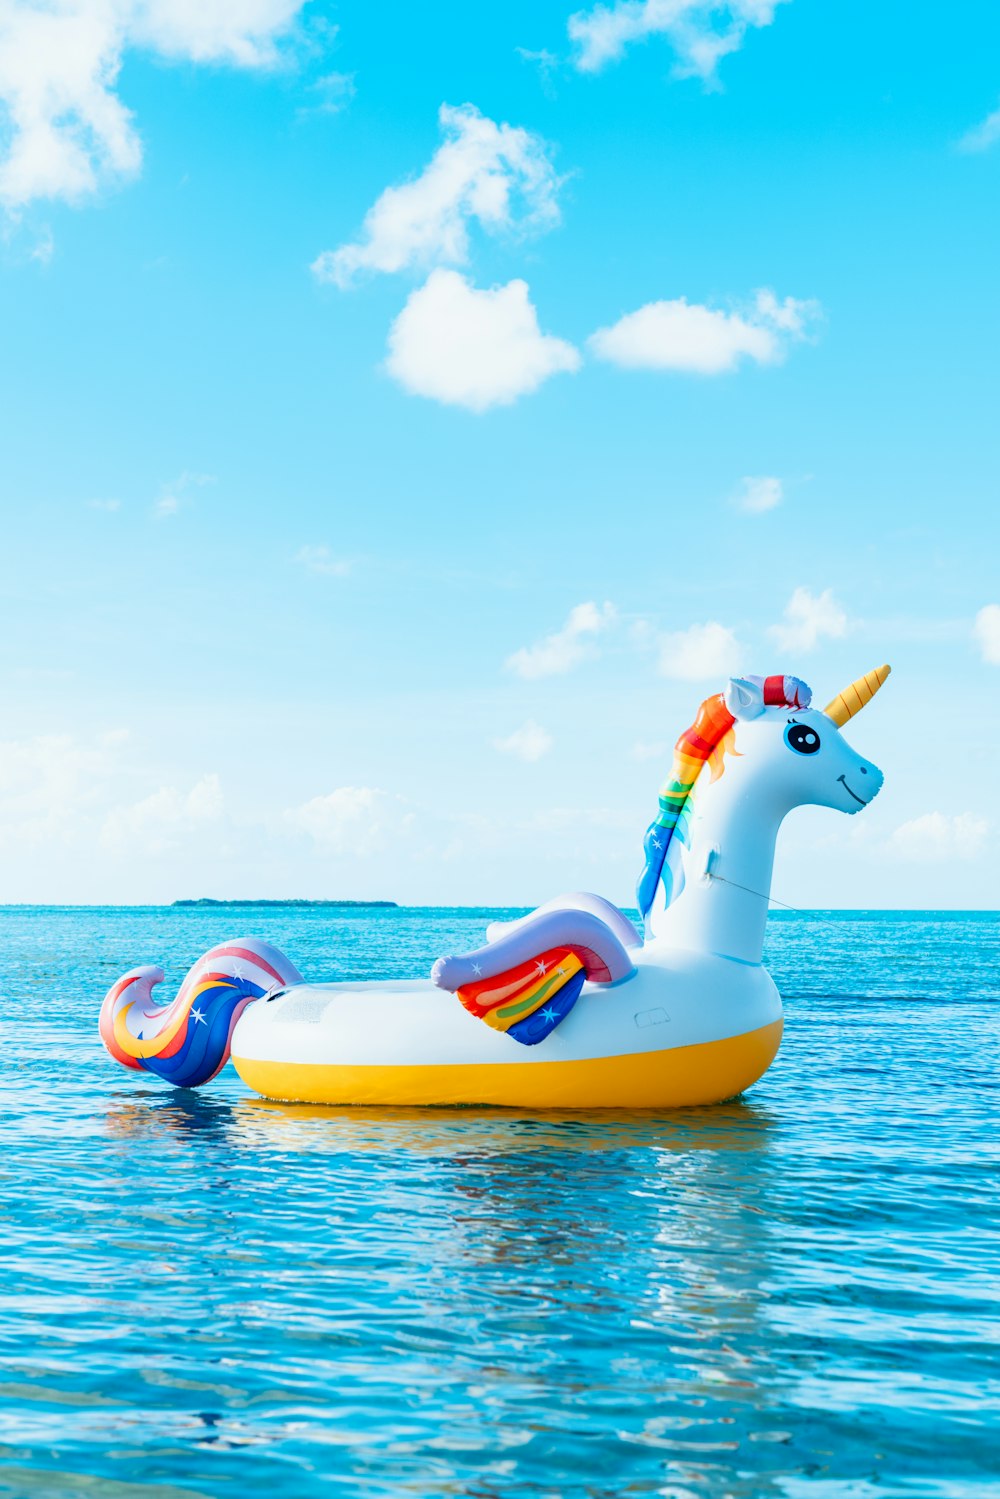 yellow and blue inflatable duck on blue sea under blue sky during daytime  photo – Free San pedro Image on Unsplash